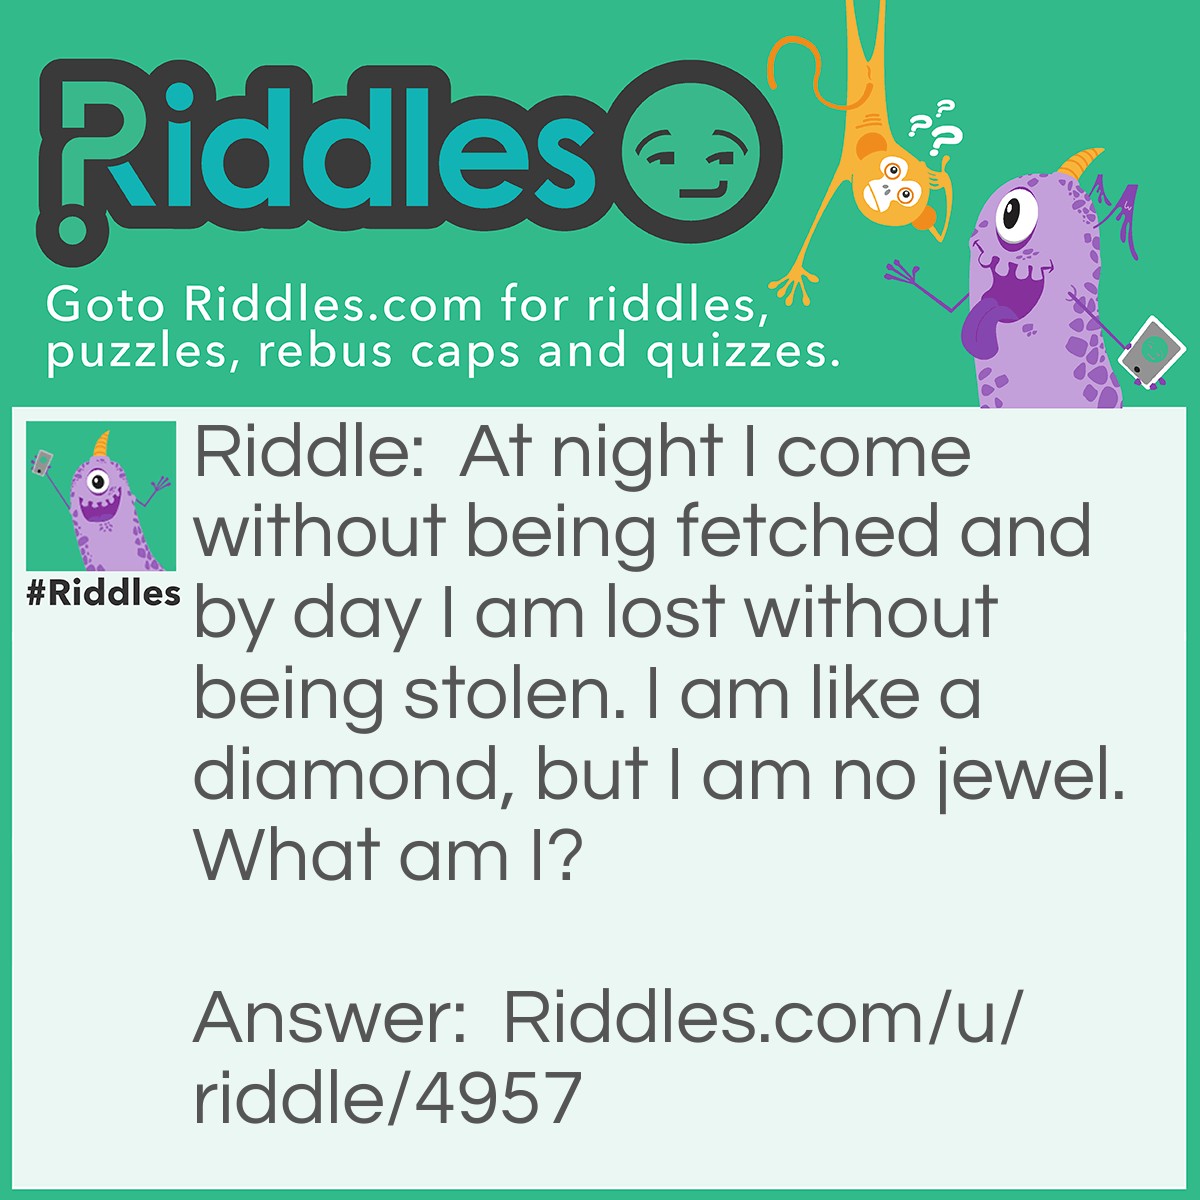 Riddle: At night I come without being fetched and by day I am lost without being stolen. I am like a diamond, but I am no jewel. What am I? Answer: Stars.